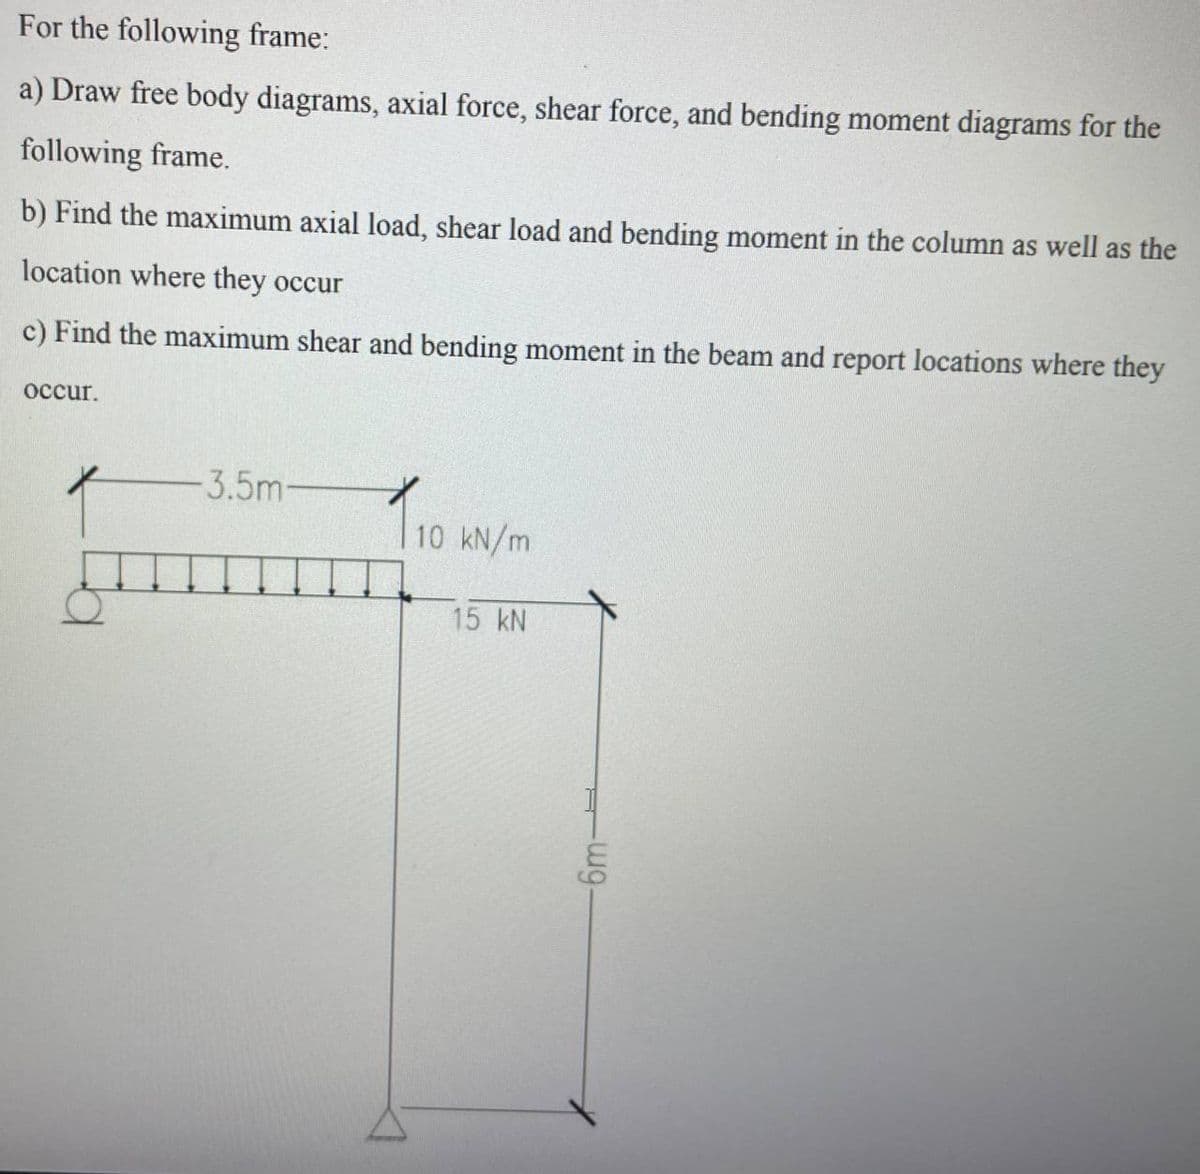 For the following frame:
a) Draw free body diagrams, axial force, shear force, and bending moment diagrams for the
following frame.
b) Find the maximum axial load, shear load and bending moment in the column as well as the
location where they occur
c) Find the maximum shear and bending moment in the beam and report locations where they
occur.
-3.5m-
10 kN/m
15 kN
-wg.